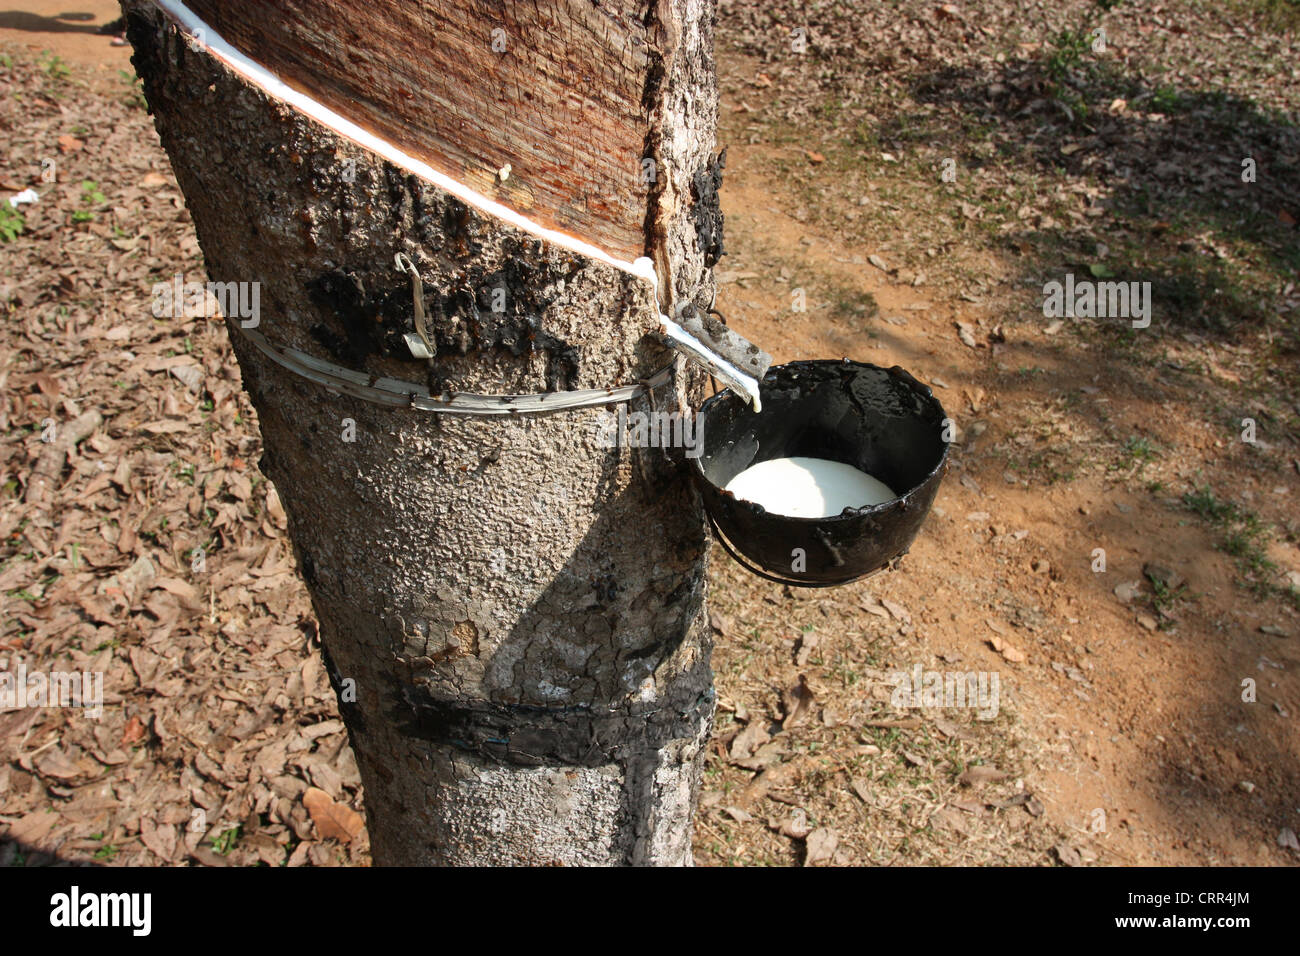 Latex or Liquid Rubber Collection from an Incised Tree in Kerala Stock Photo